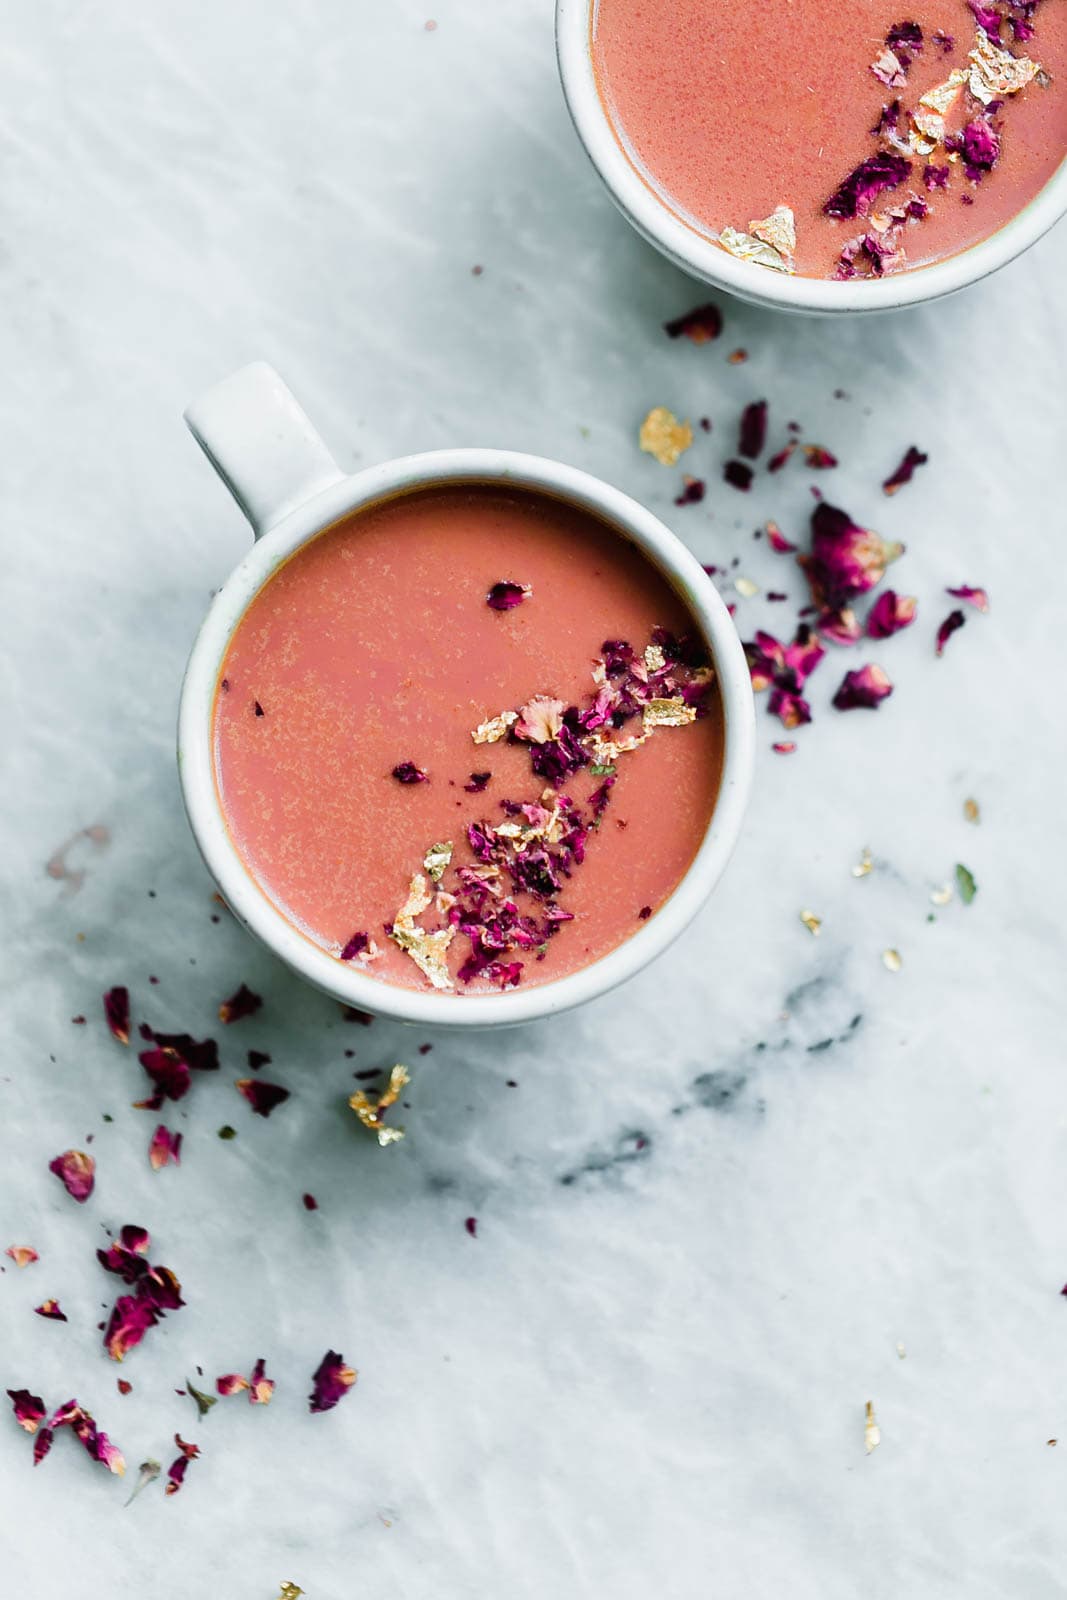 Elevate your bedtime routine with this Pink Moon Milk fit for a princess. Made with vanilla almondmilk, beetroot, turmeric, agave, dried rose hips, and edible gold.